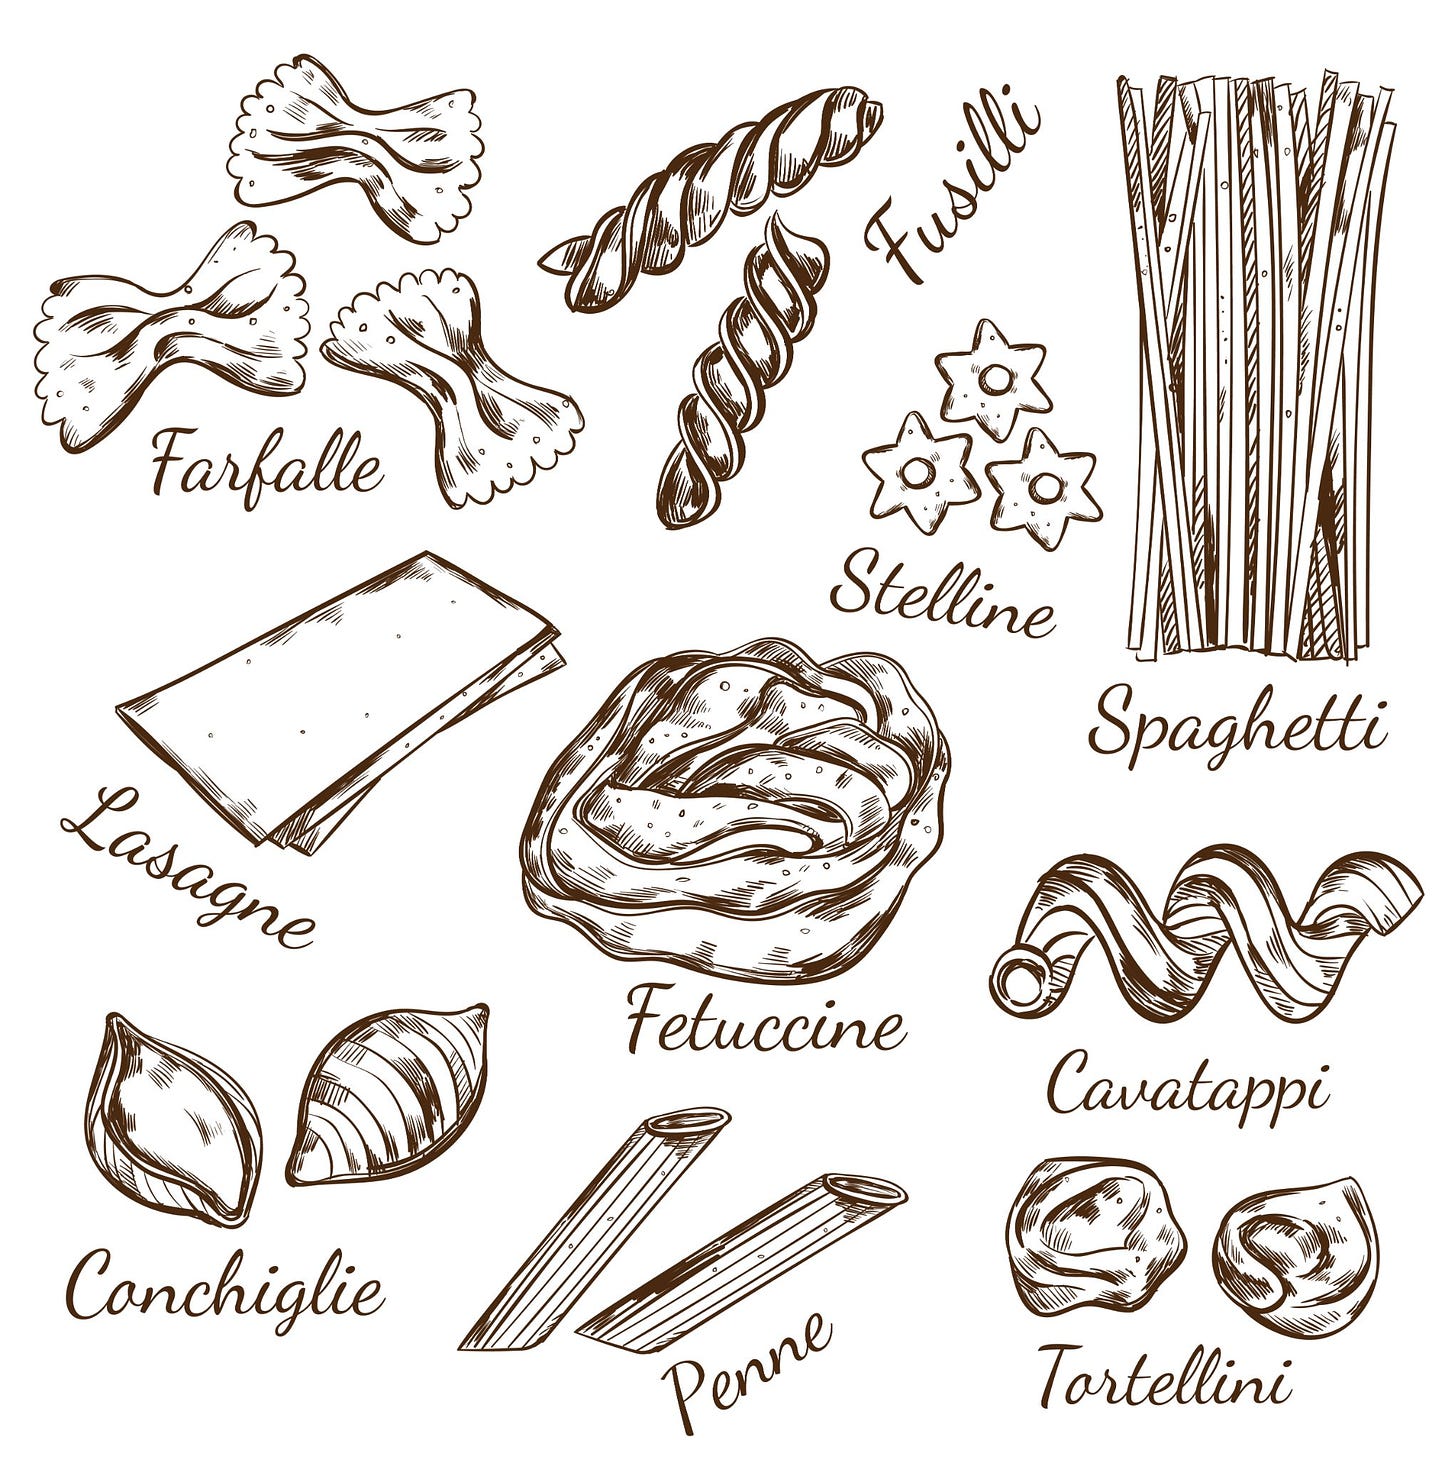 Chart showing drawings of various shapes of pasta including fusilli, stelline and spaghetti